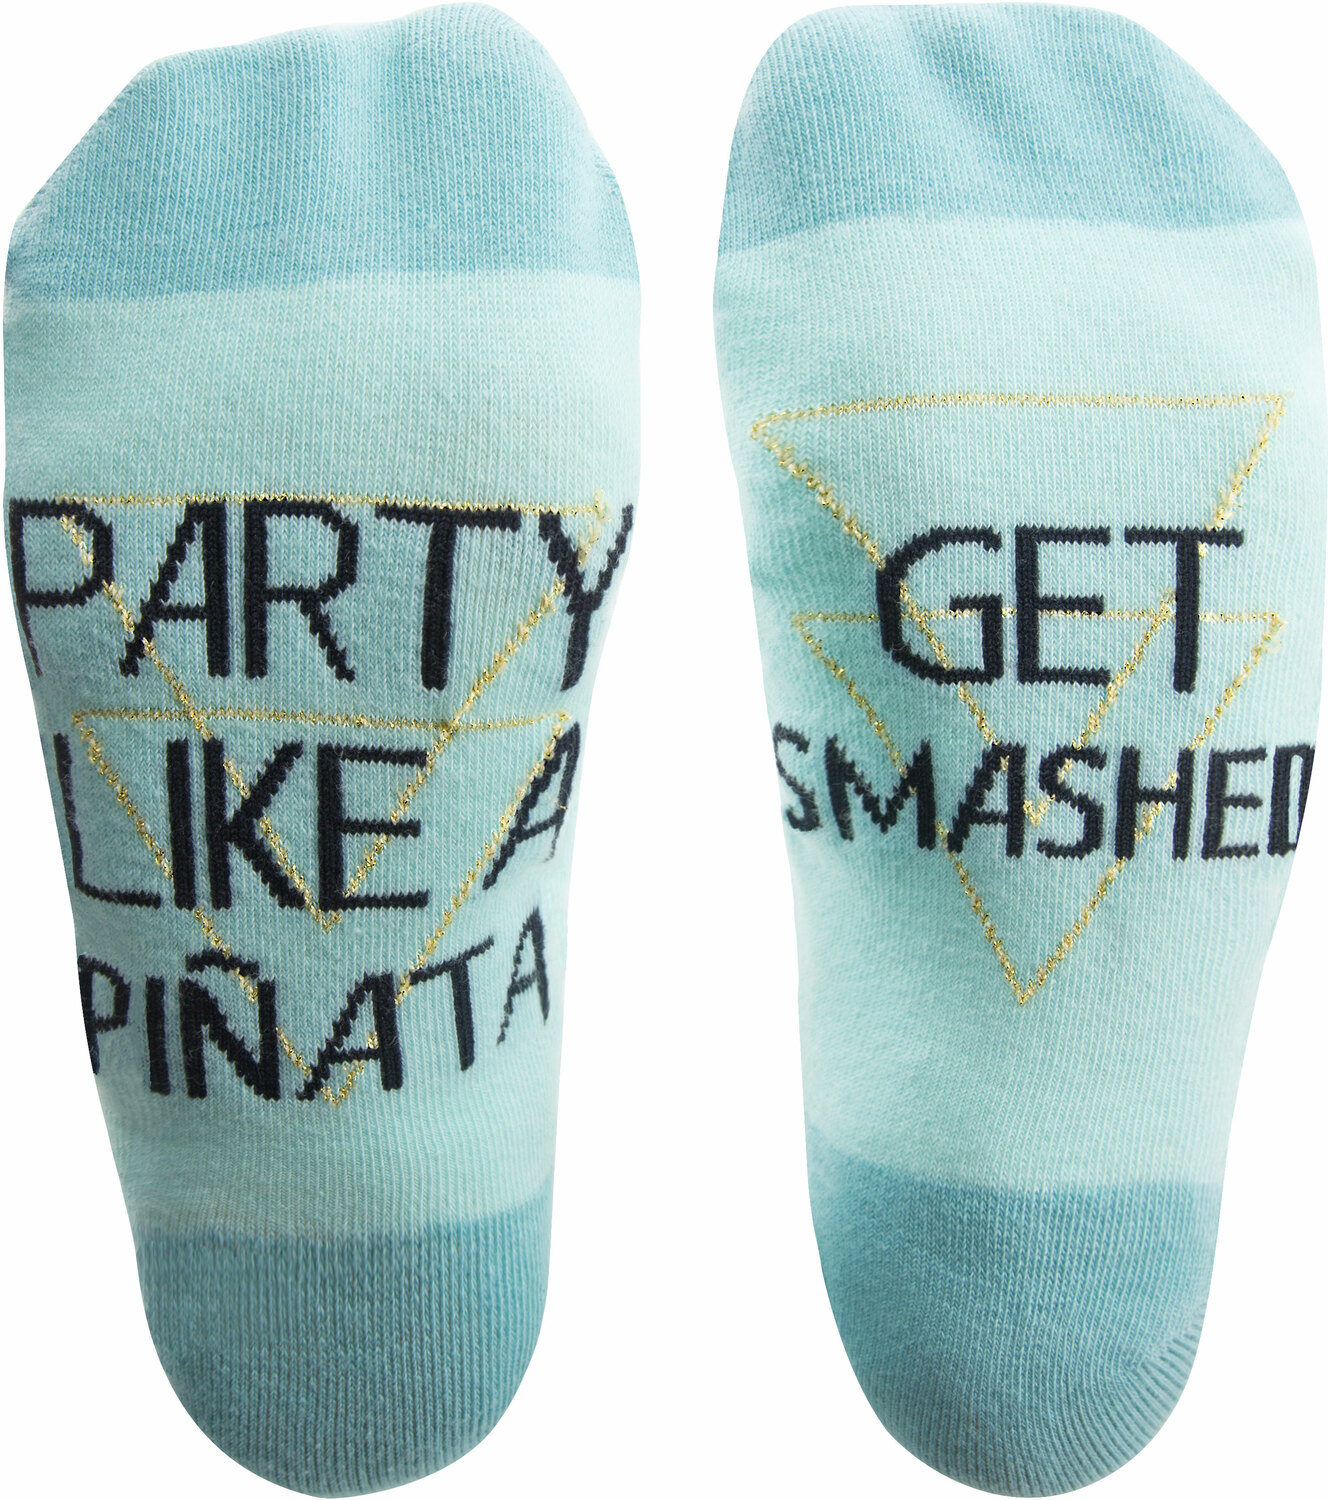 Party by Salty Celebration - Party - Ladies Cotton Blend Sock